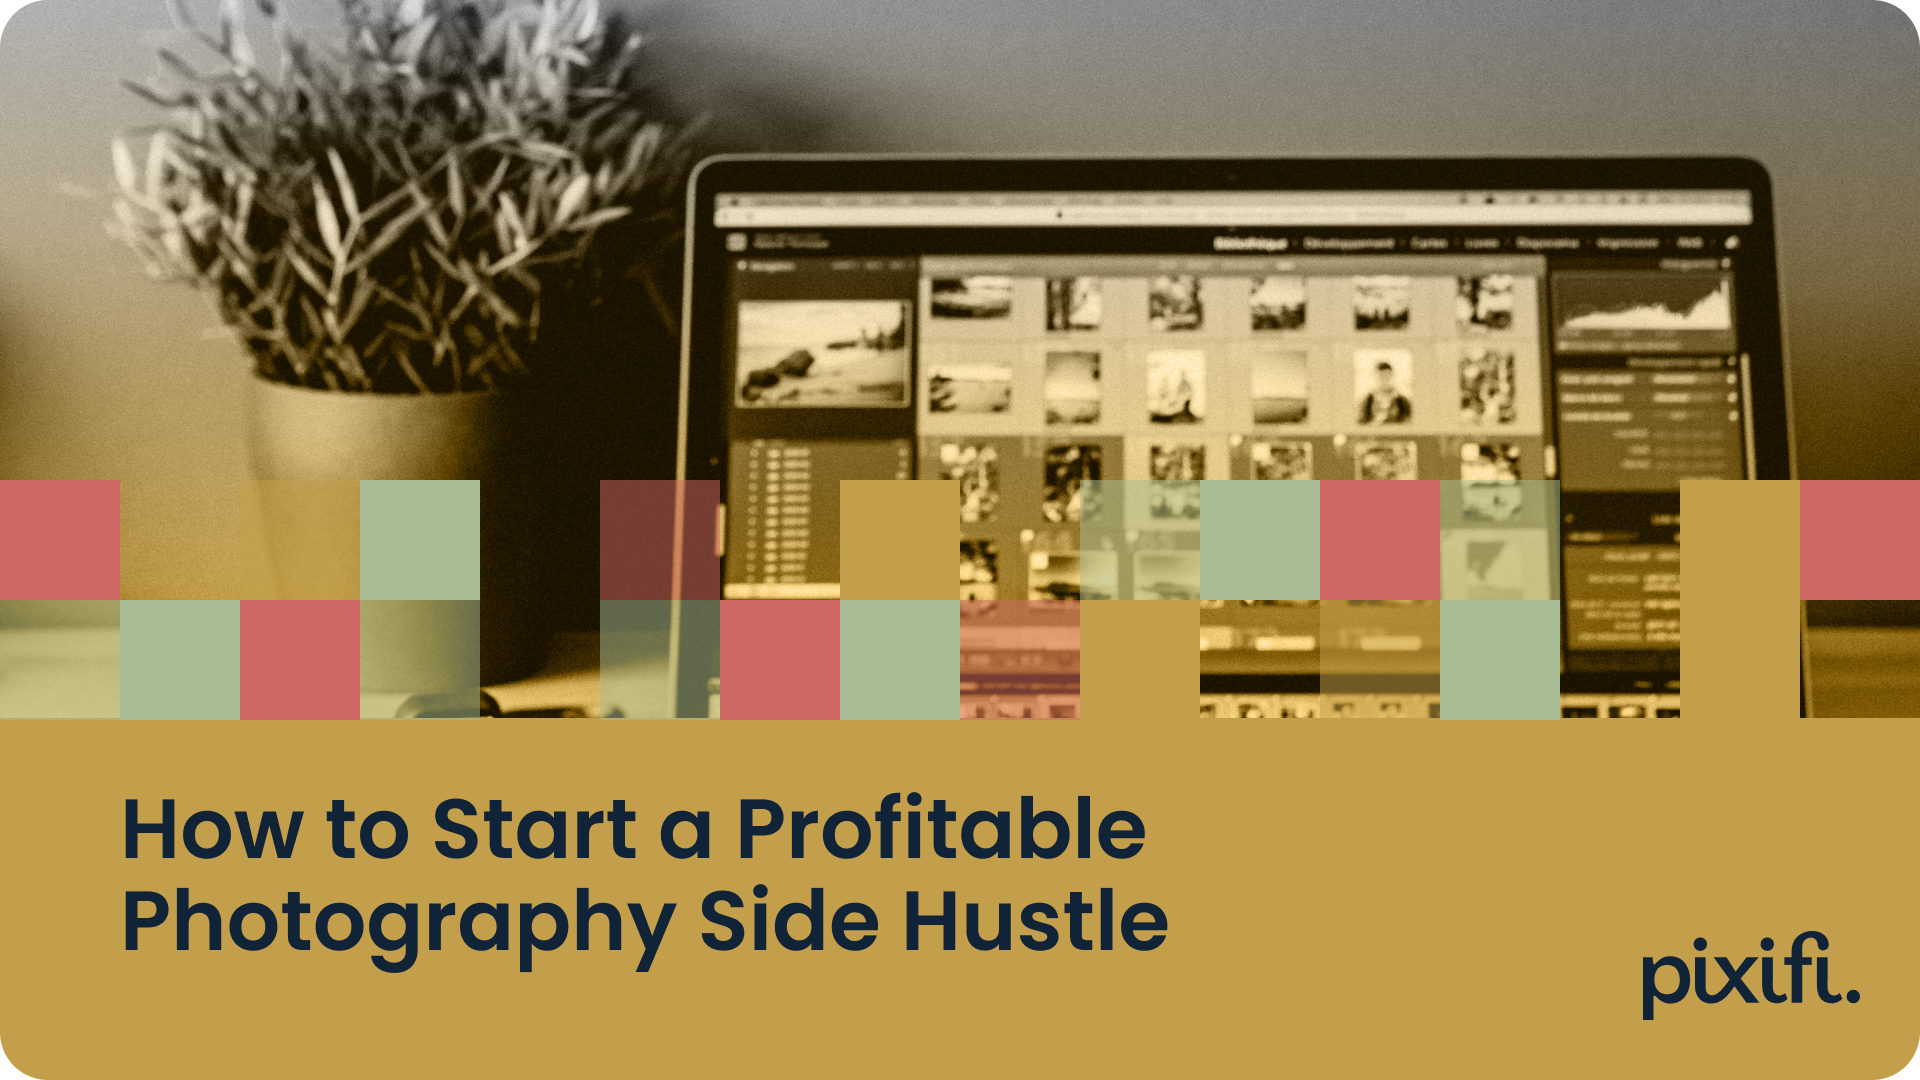 How to Start a Profitable Photography Side Hustle